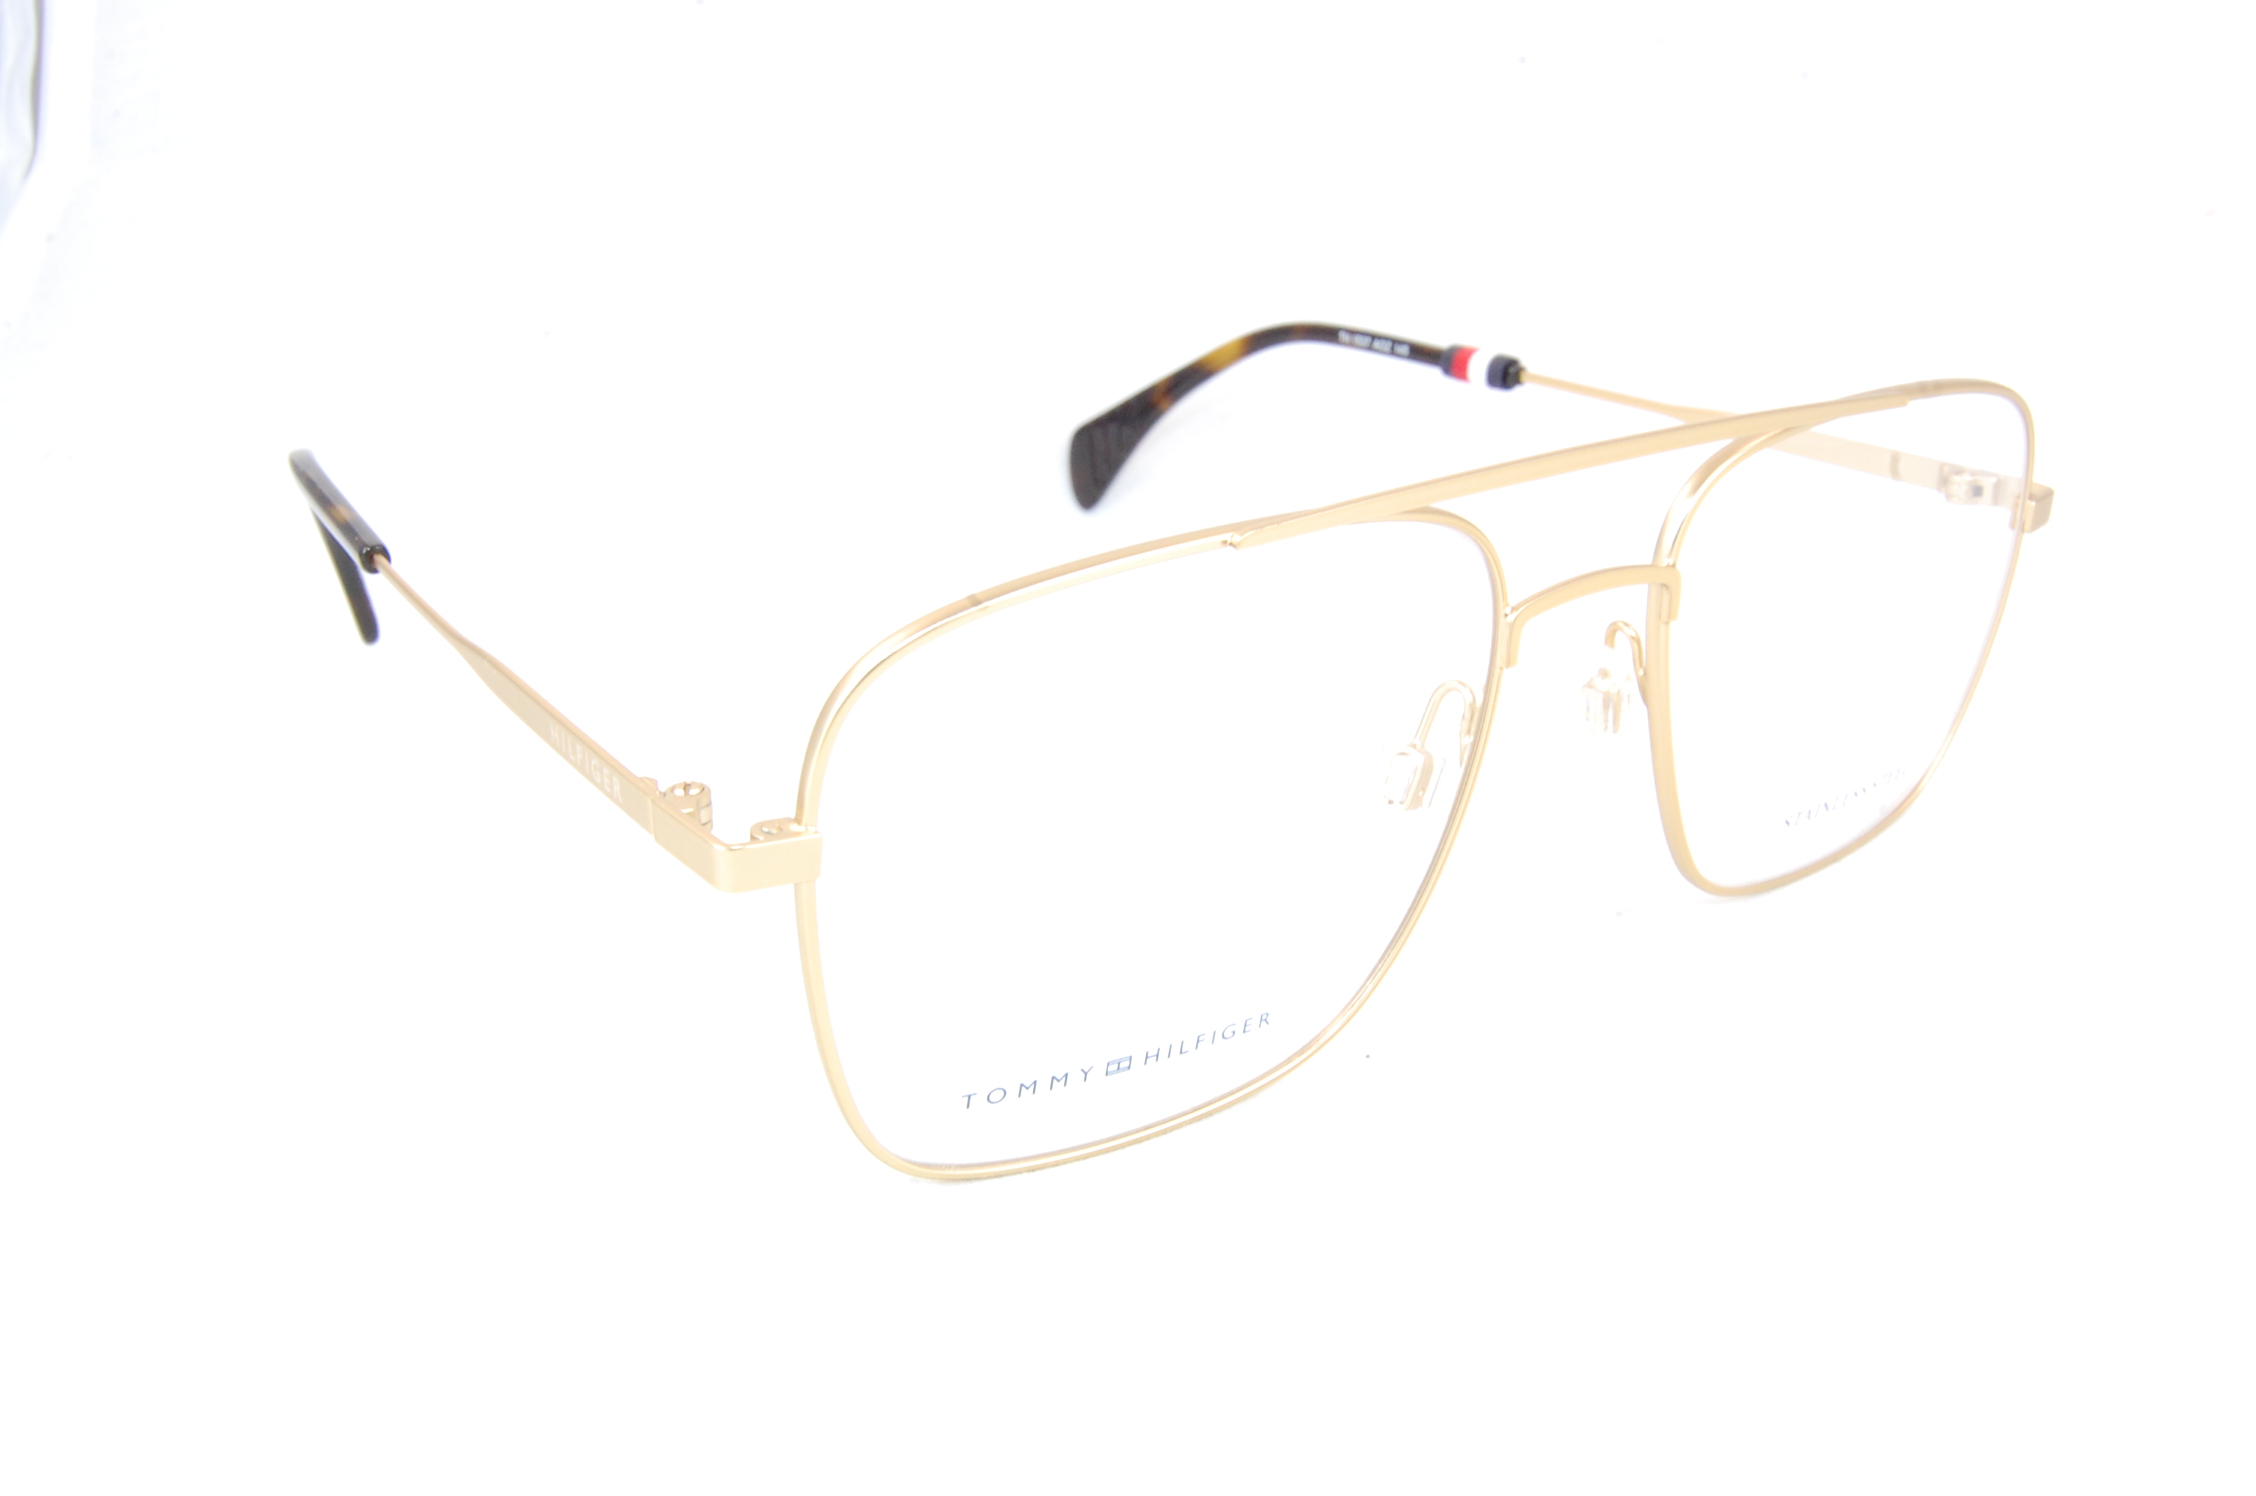 TOMMY HILFIGER OPTIQUE 10/10 FACHES THUMESNIL